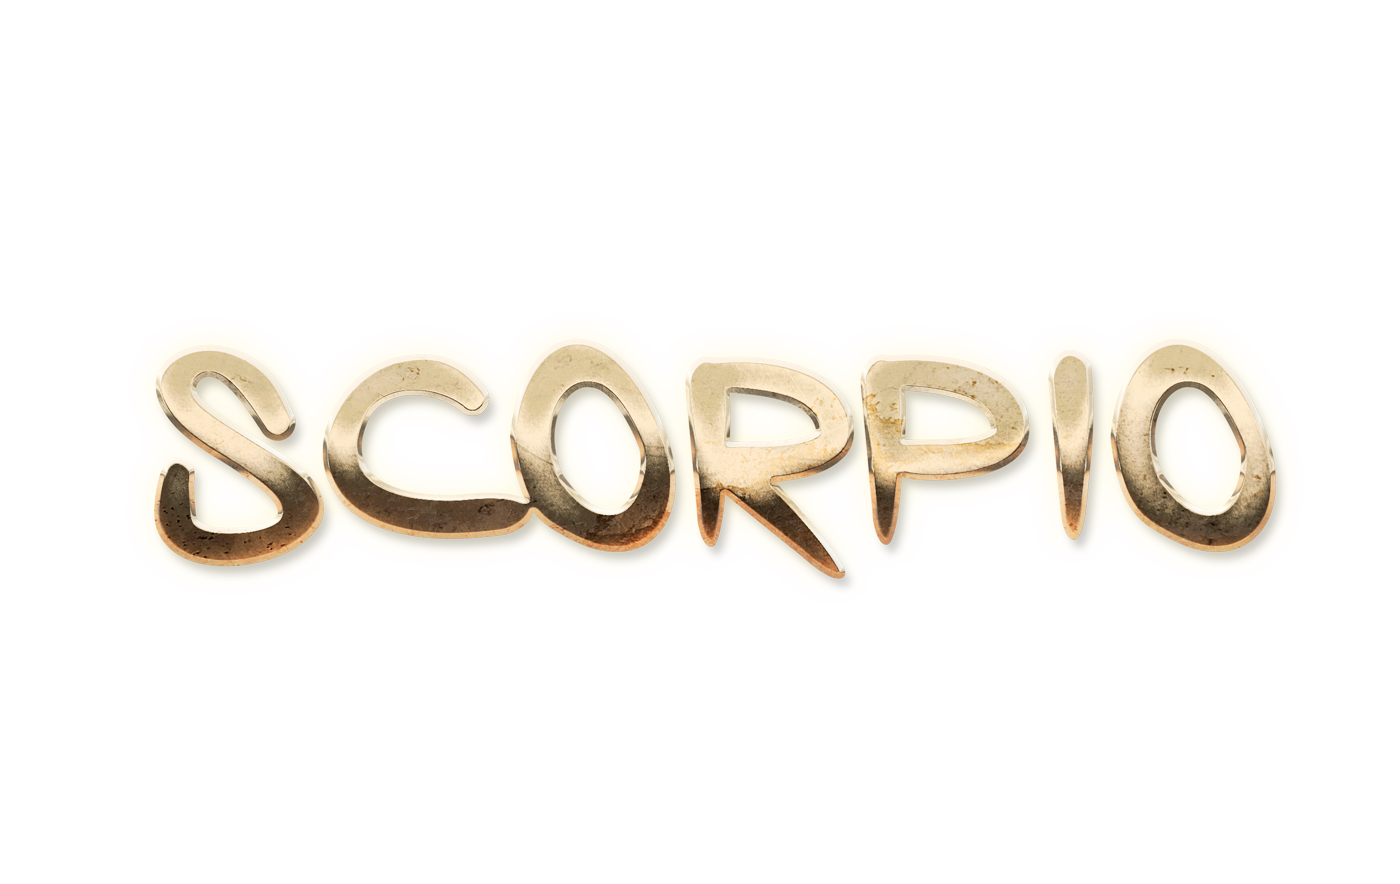 zodiac sign word SCORPIO golden text typography PNG images free